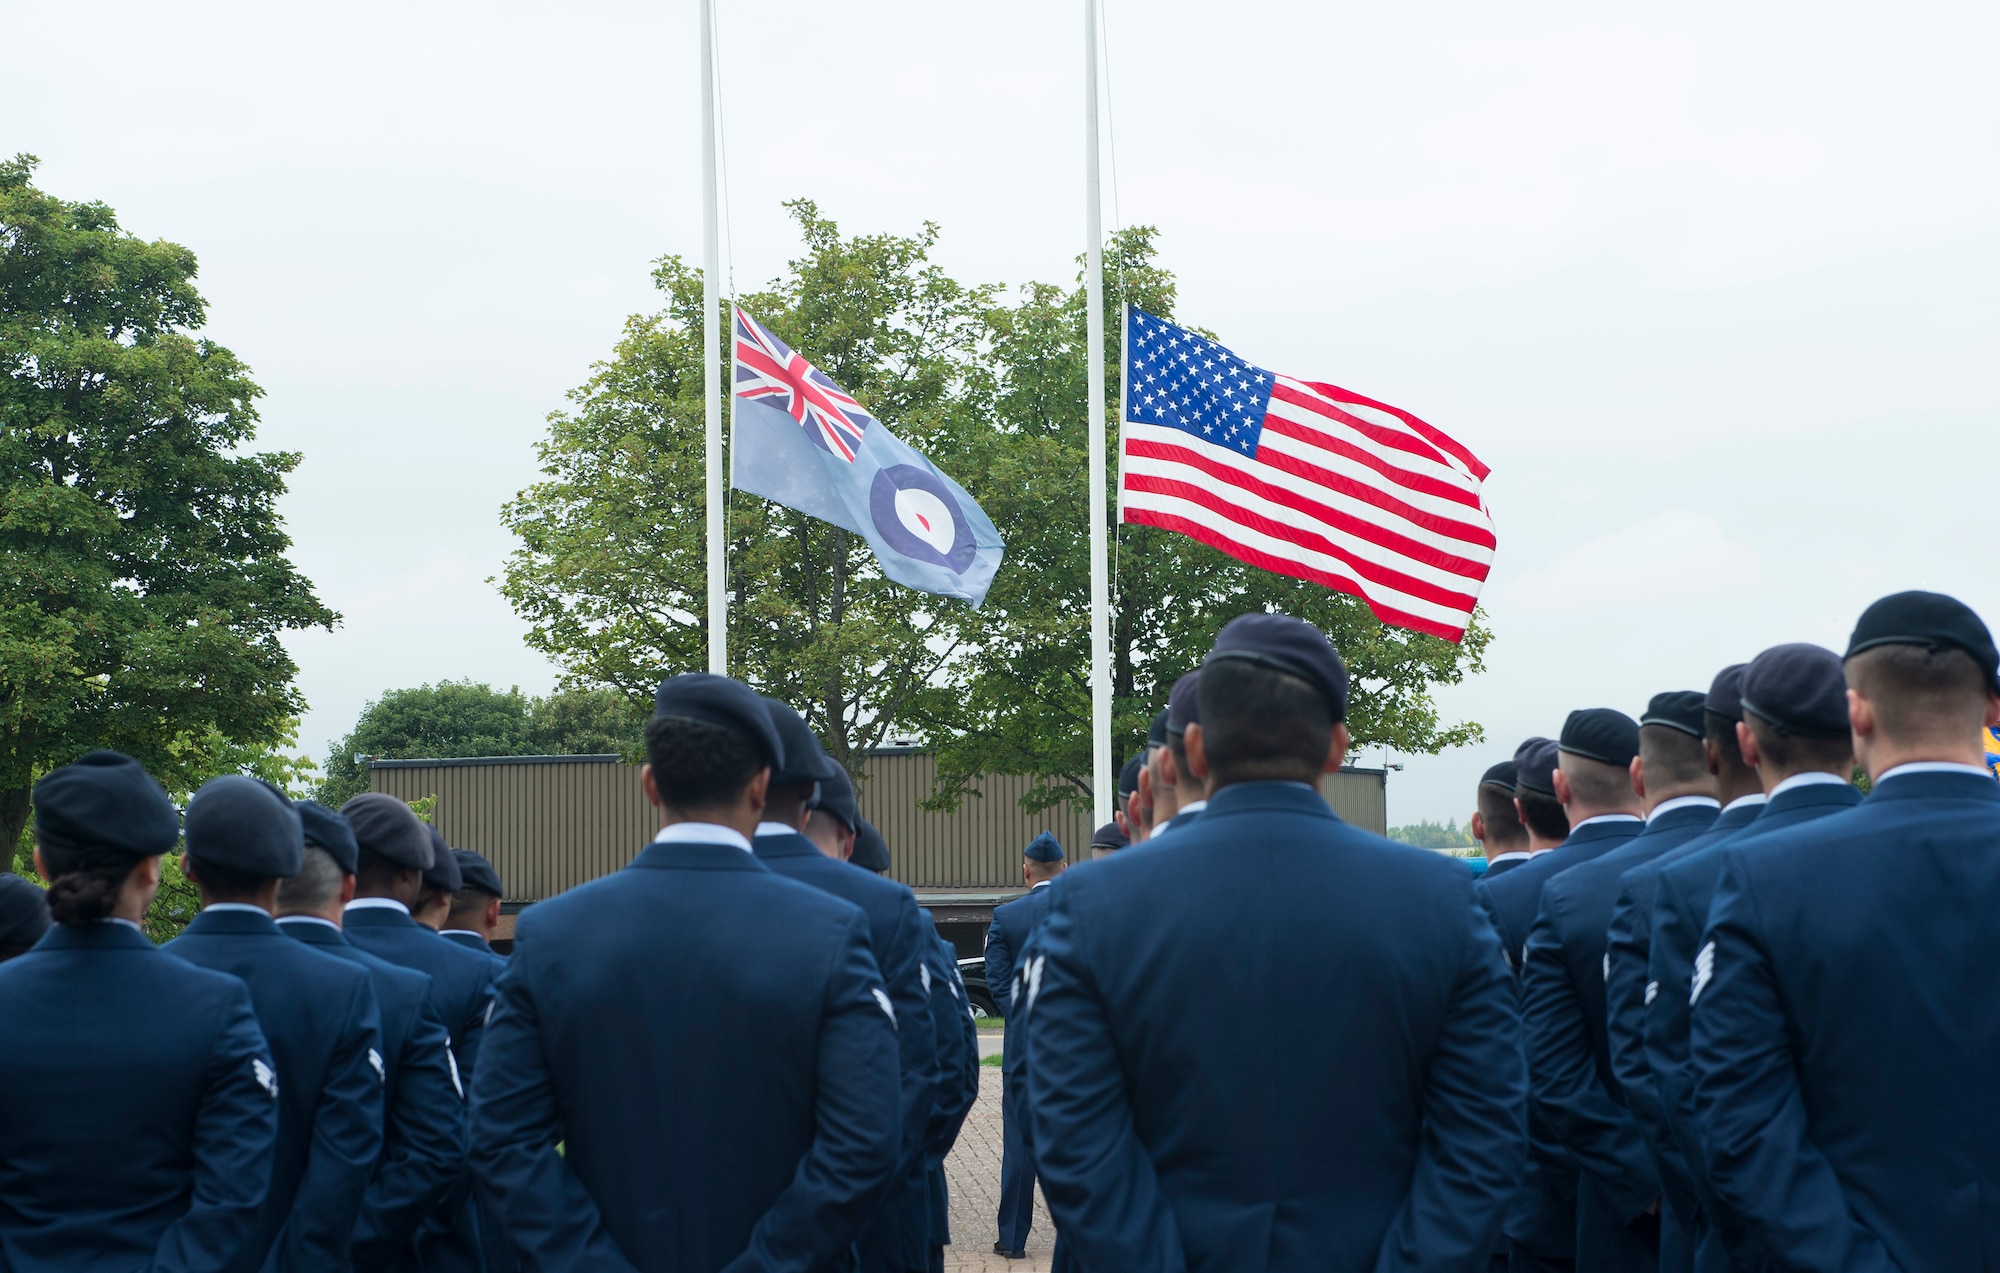 Airmen from the 423rd Security Forces Squadron stand in honor of Sept. 11 at RAF Croughton, United Kingdom, Sept. 11, 2018. RAF Croughton payed respects by holding a retreat ceremony and speech. (U.S. Air Force photo by Senior Airman Chase Sousa)